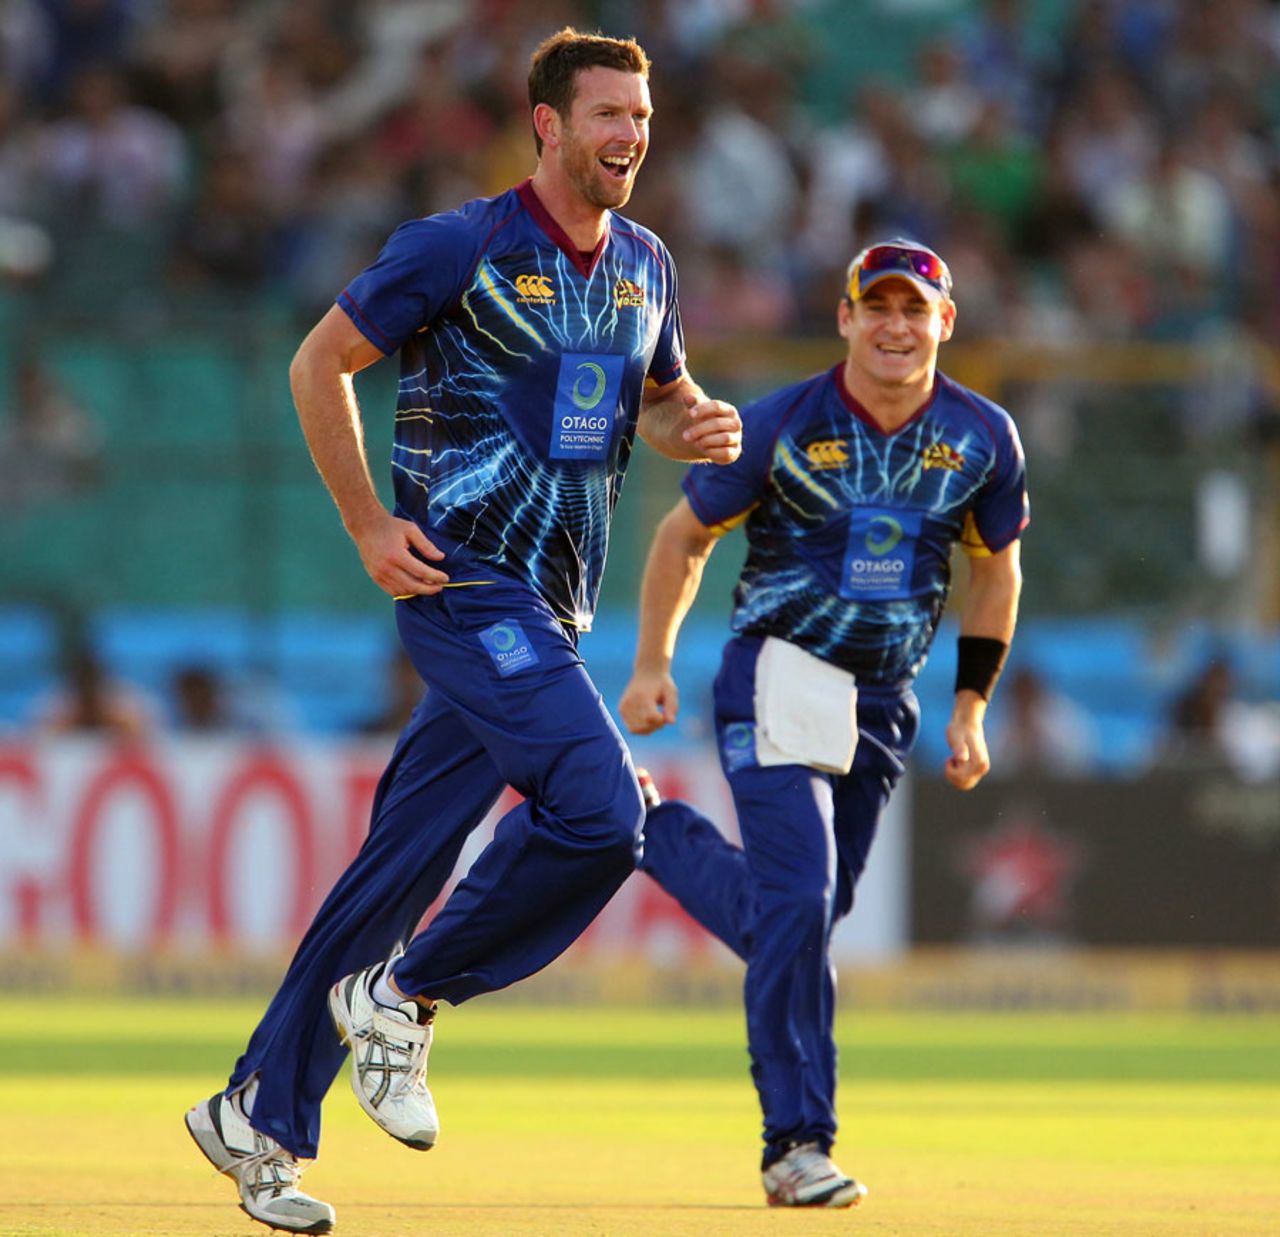 Ian Butler finished with 3 for 47, Otago Volts v Perth Scorchers, Group A, Champions League 2013, Jaipur, September 25, 2013